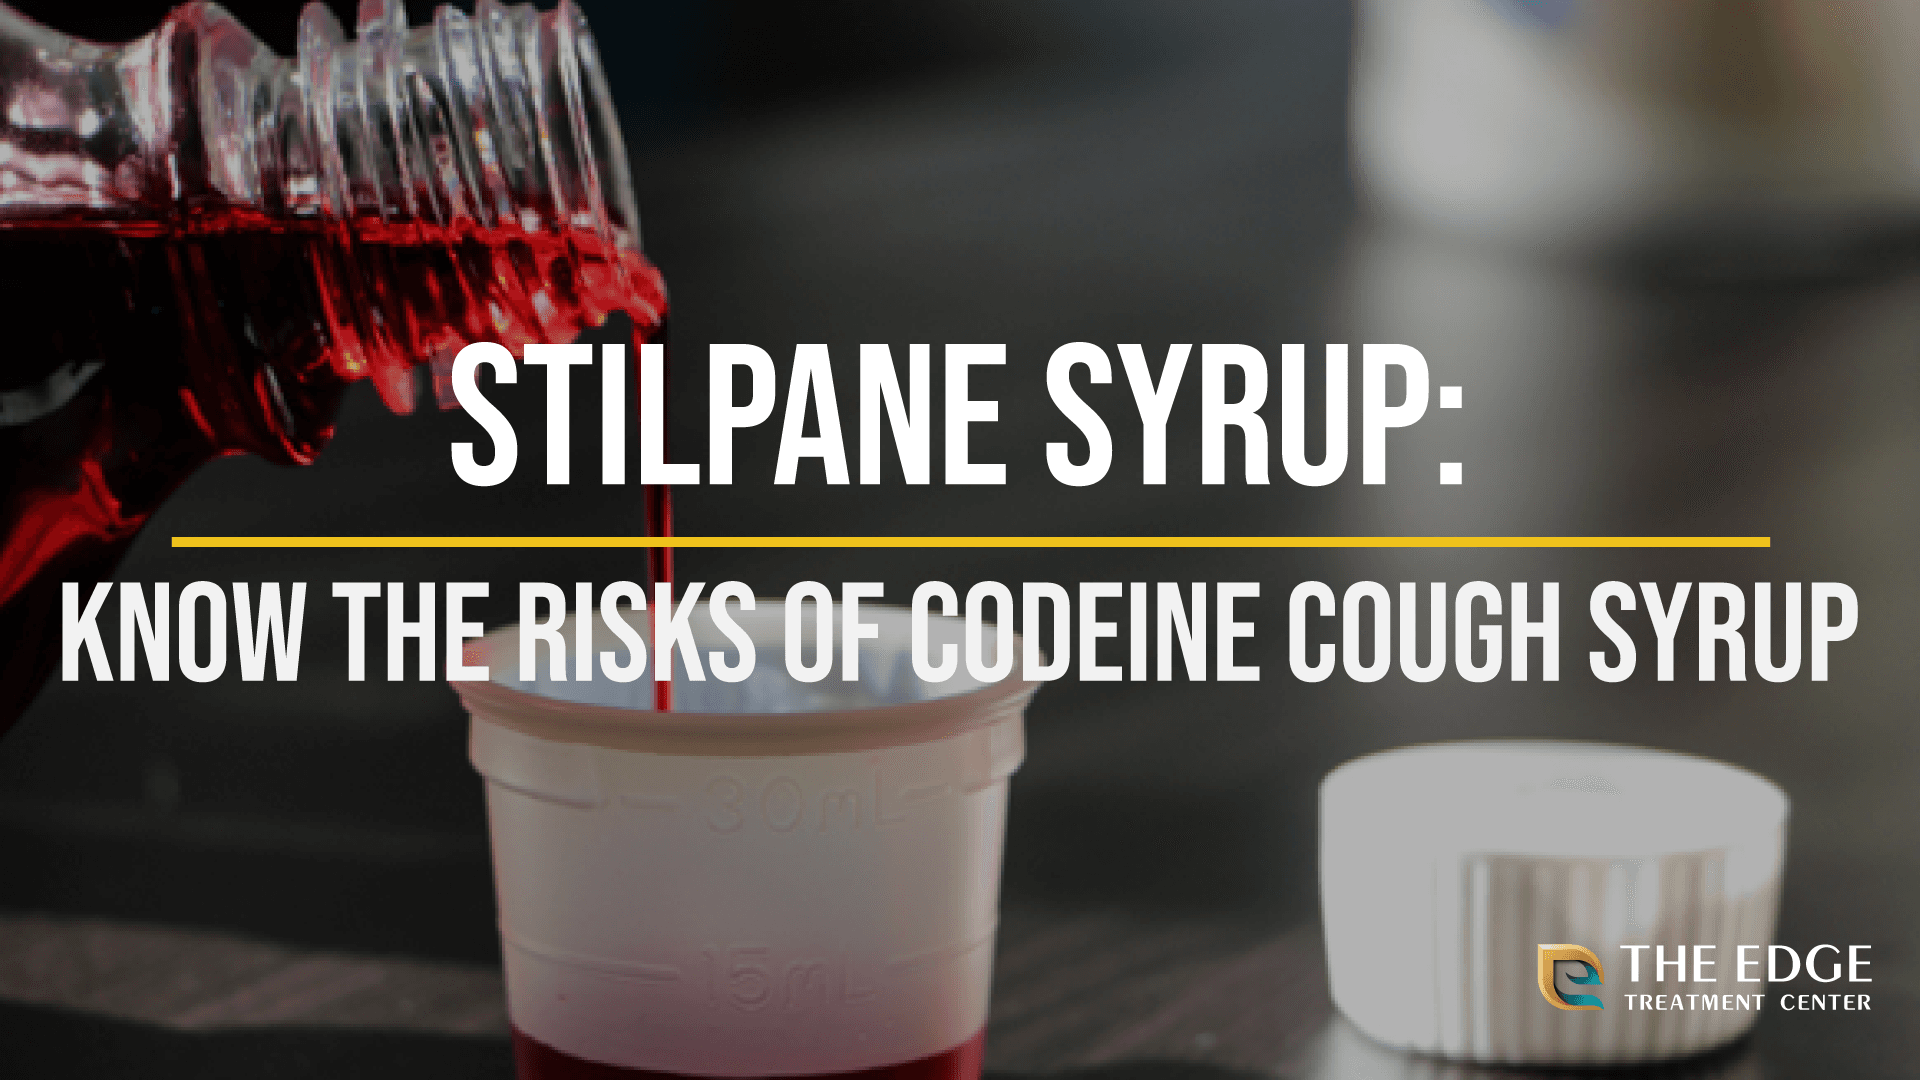 What is Stilpane Syrup? Get the Facts About Codeine Cough Syrups